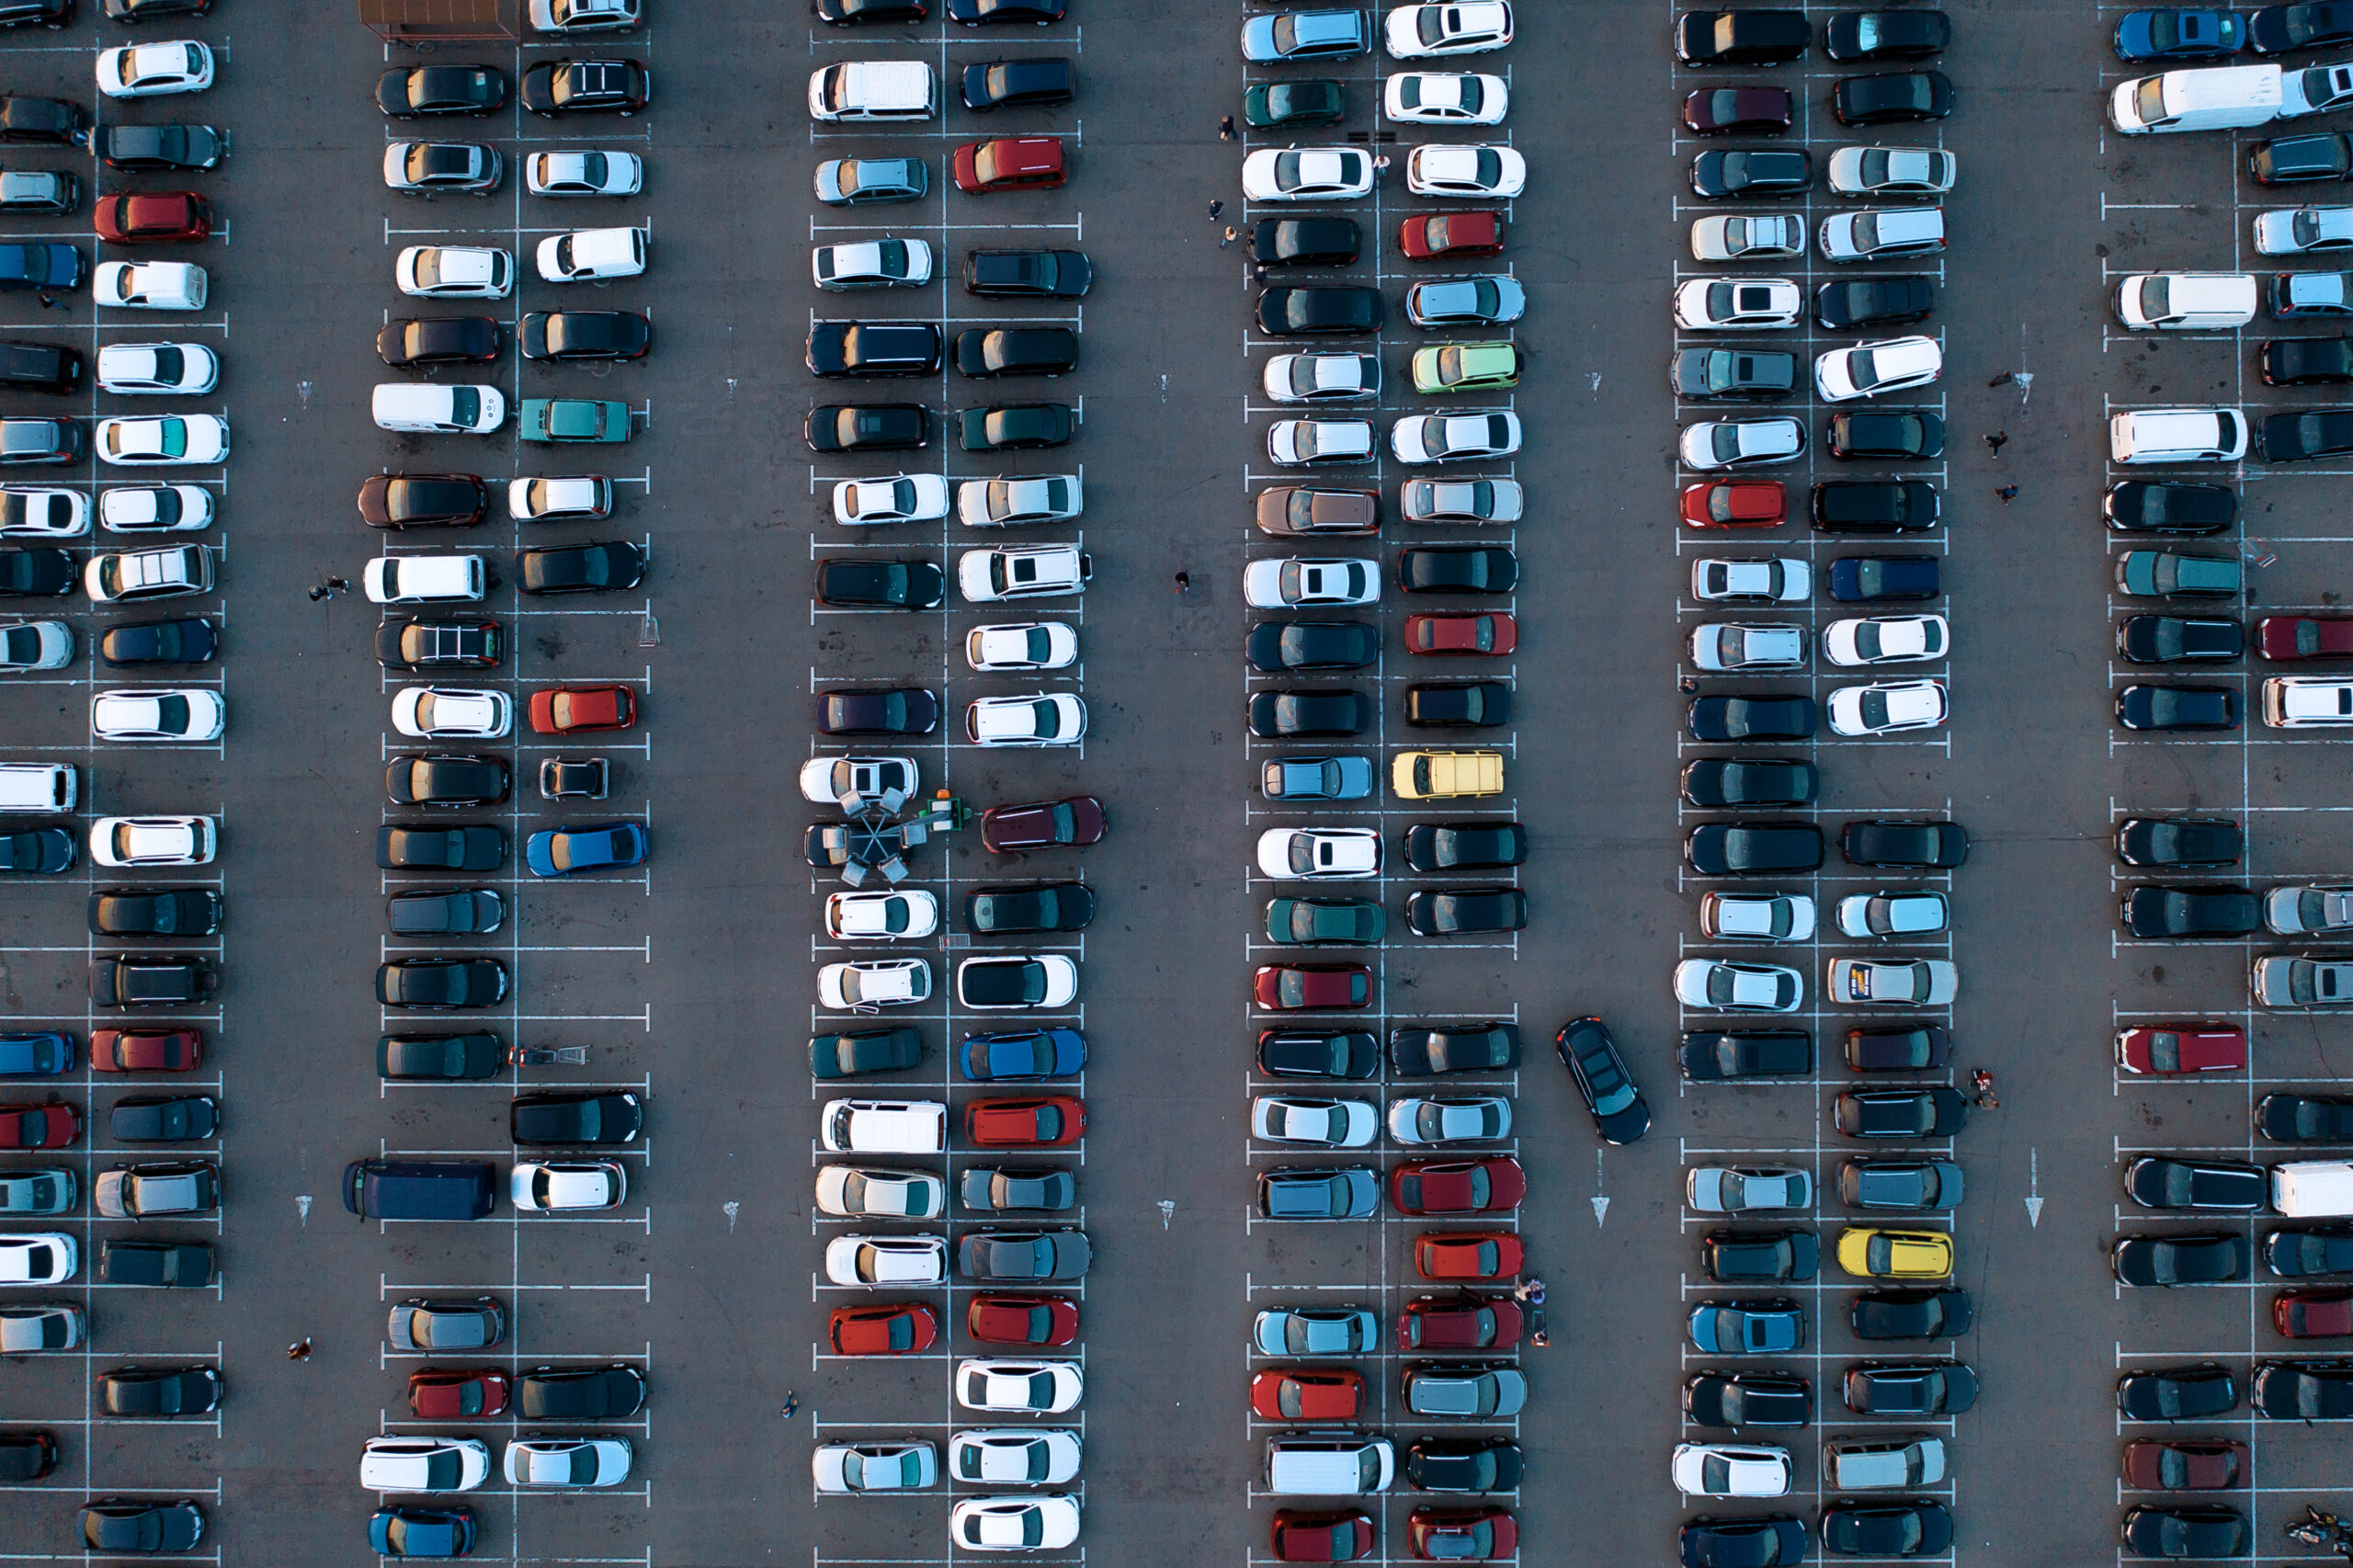 Picture from above of a parking lot with rows of cars